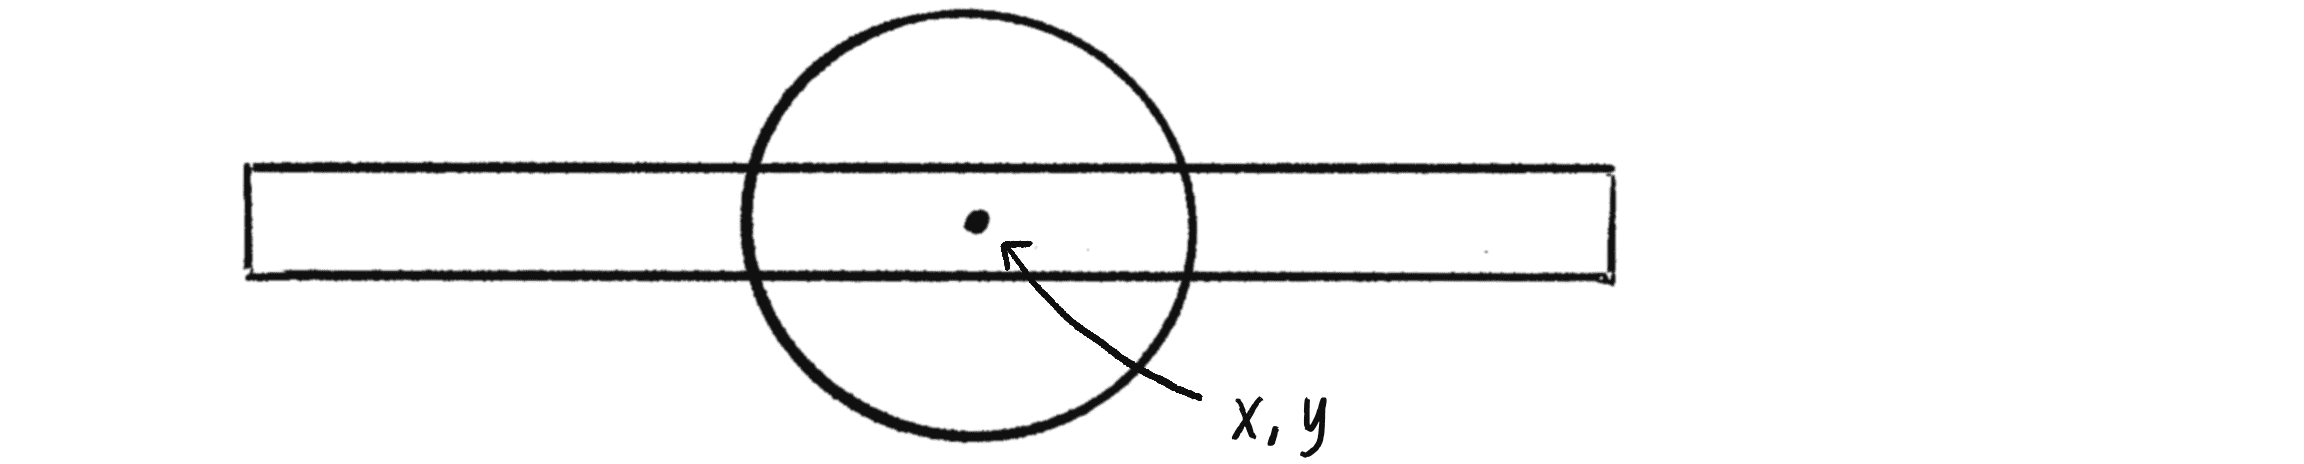 Figure 6.7: A rectangle and a circle with the same (x, y) reference point